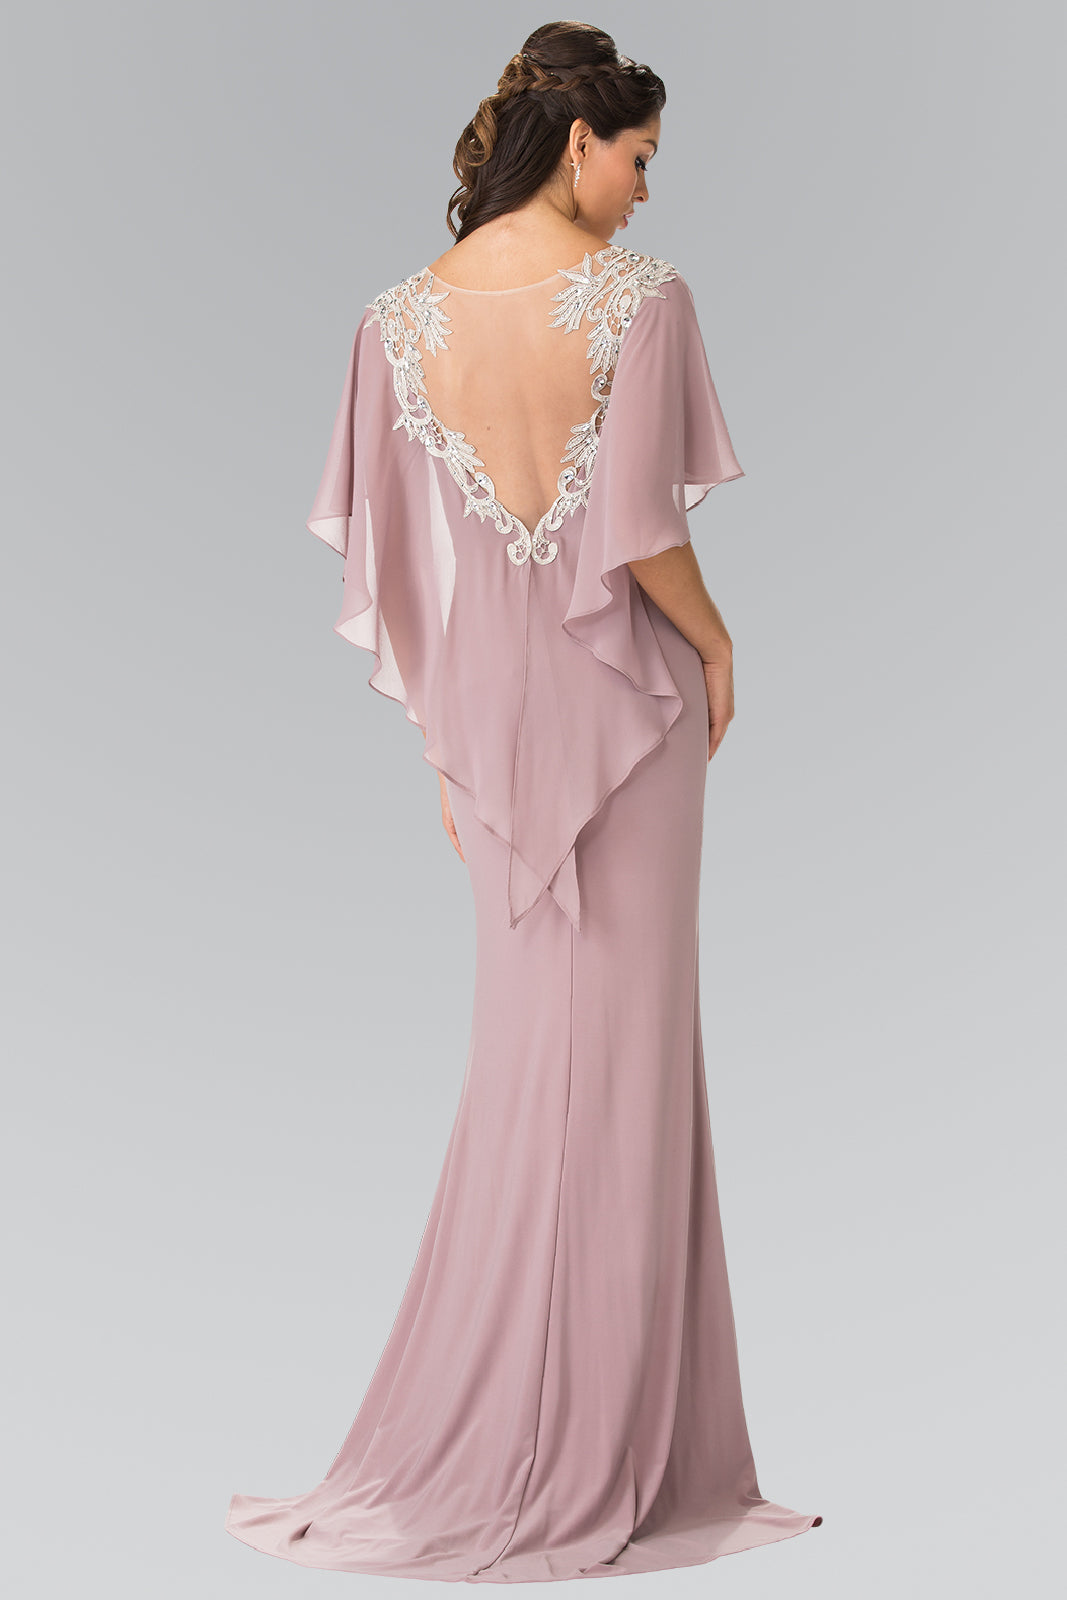 Dress with Attached Cape that Drapes Down the Back-smcdress